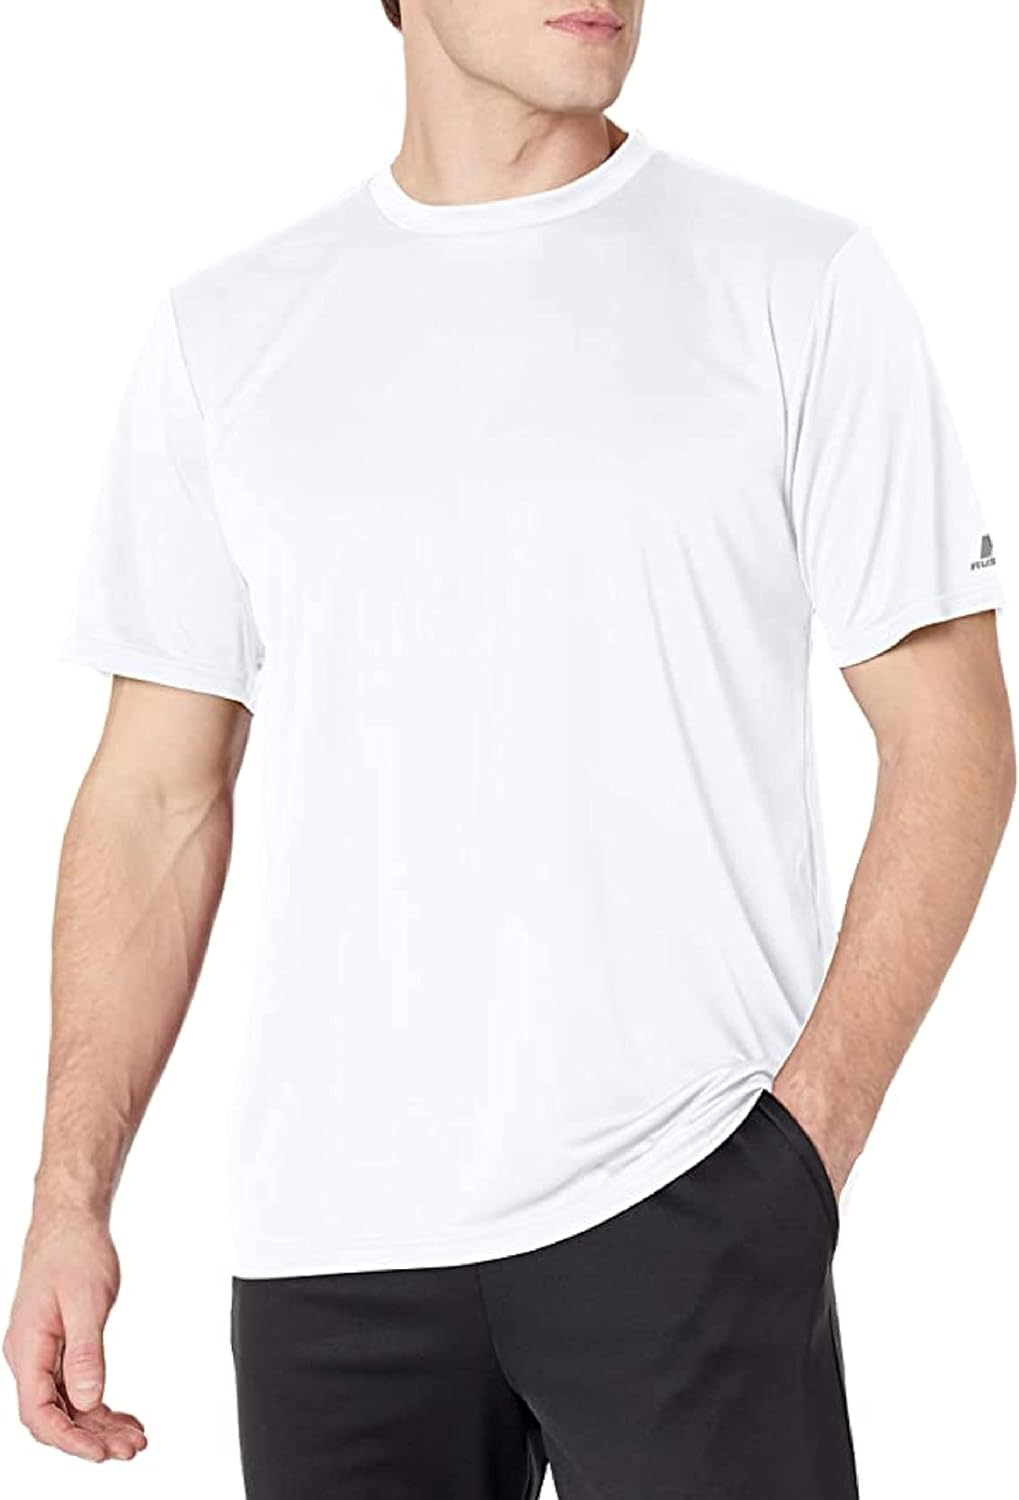 Russell Athletic Men's Performance T-Shirt, White, Small